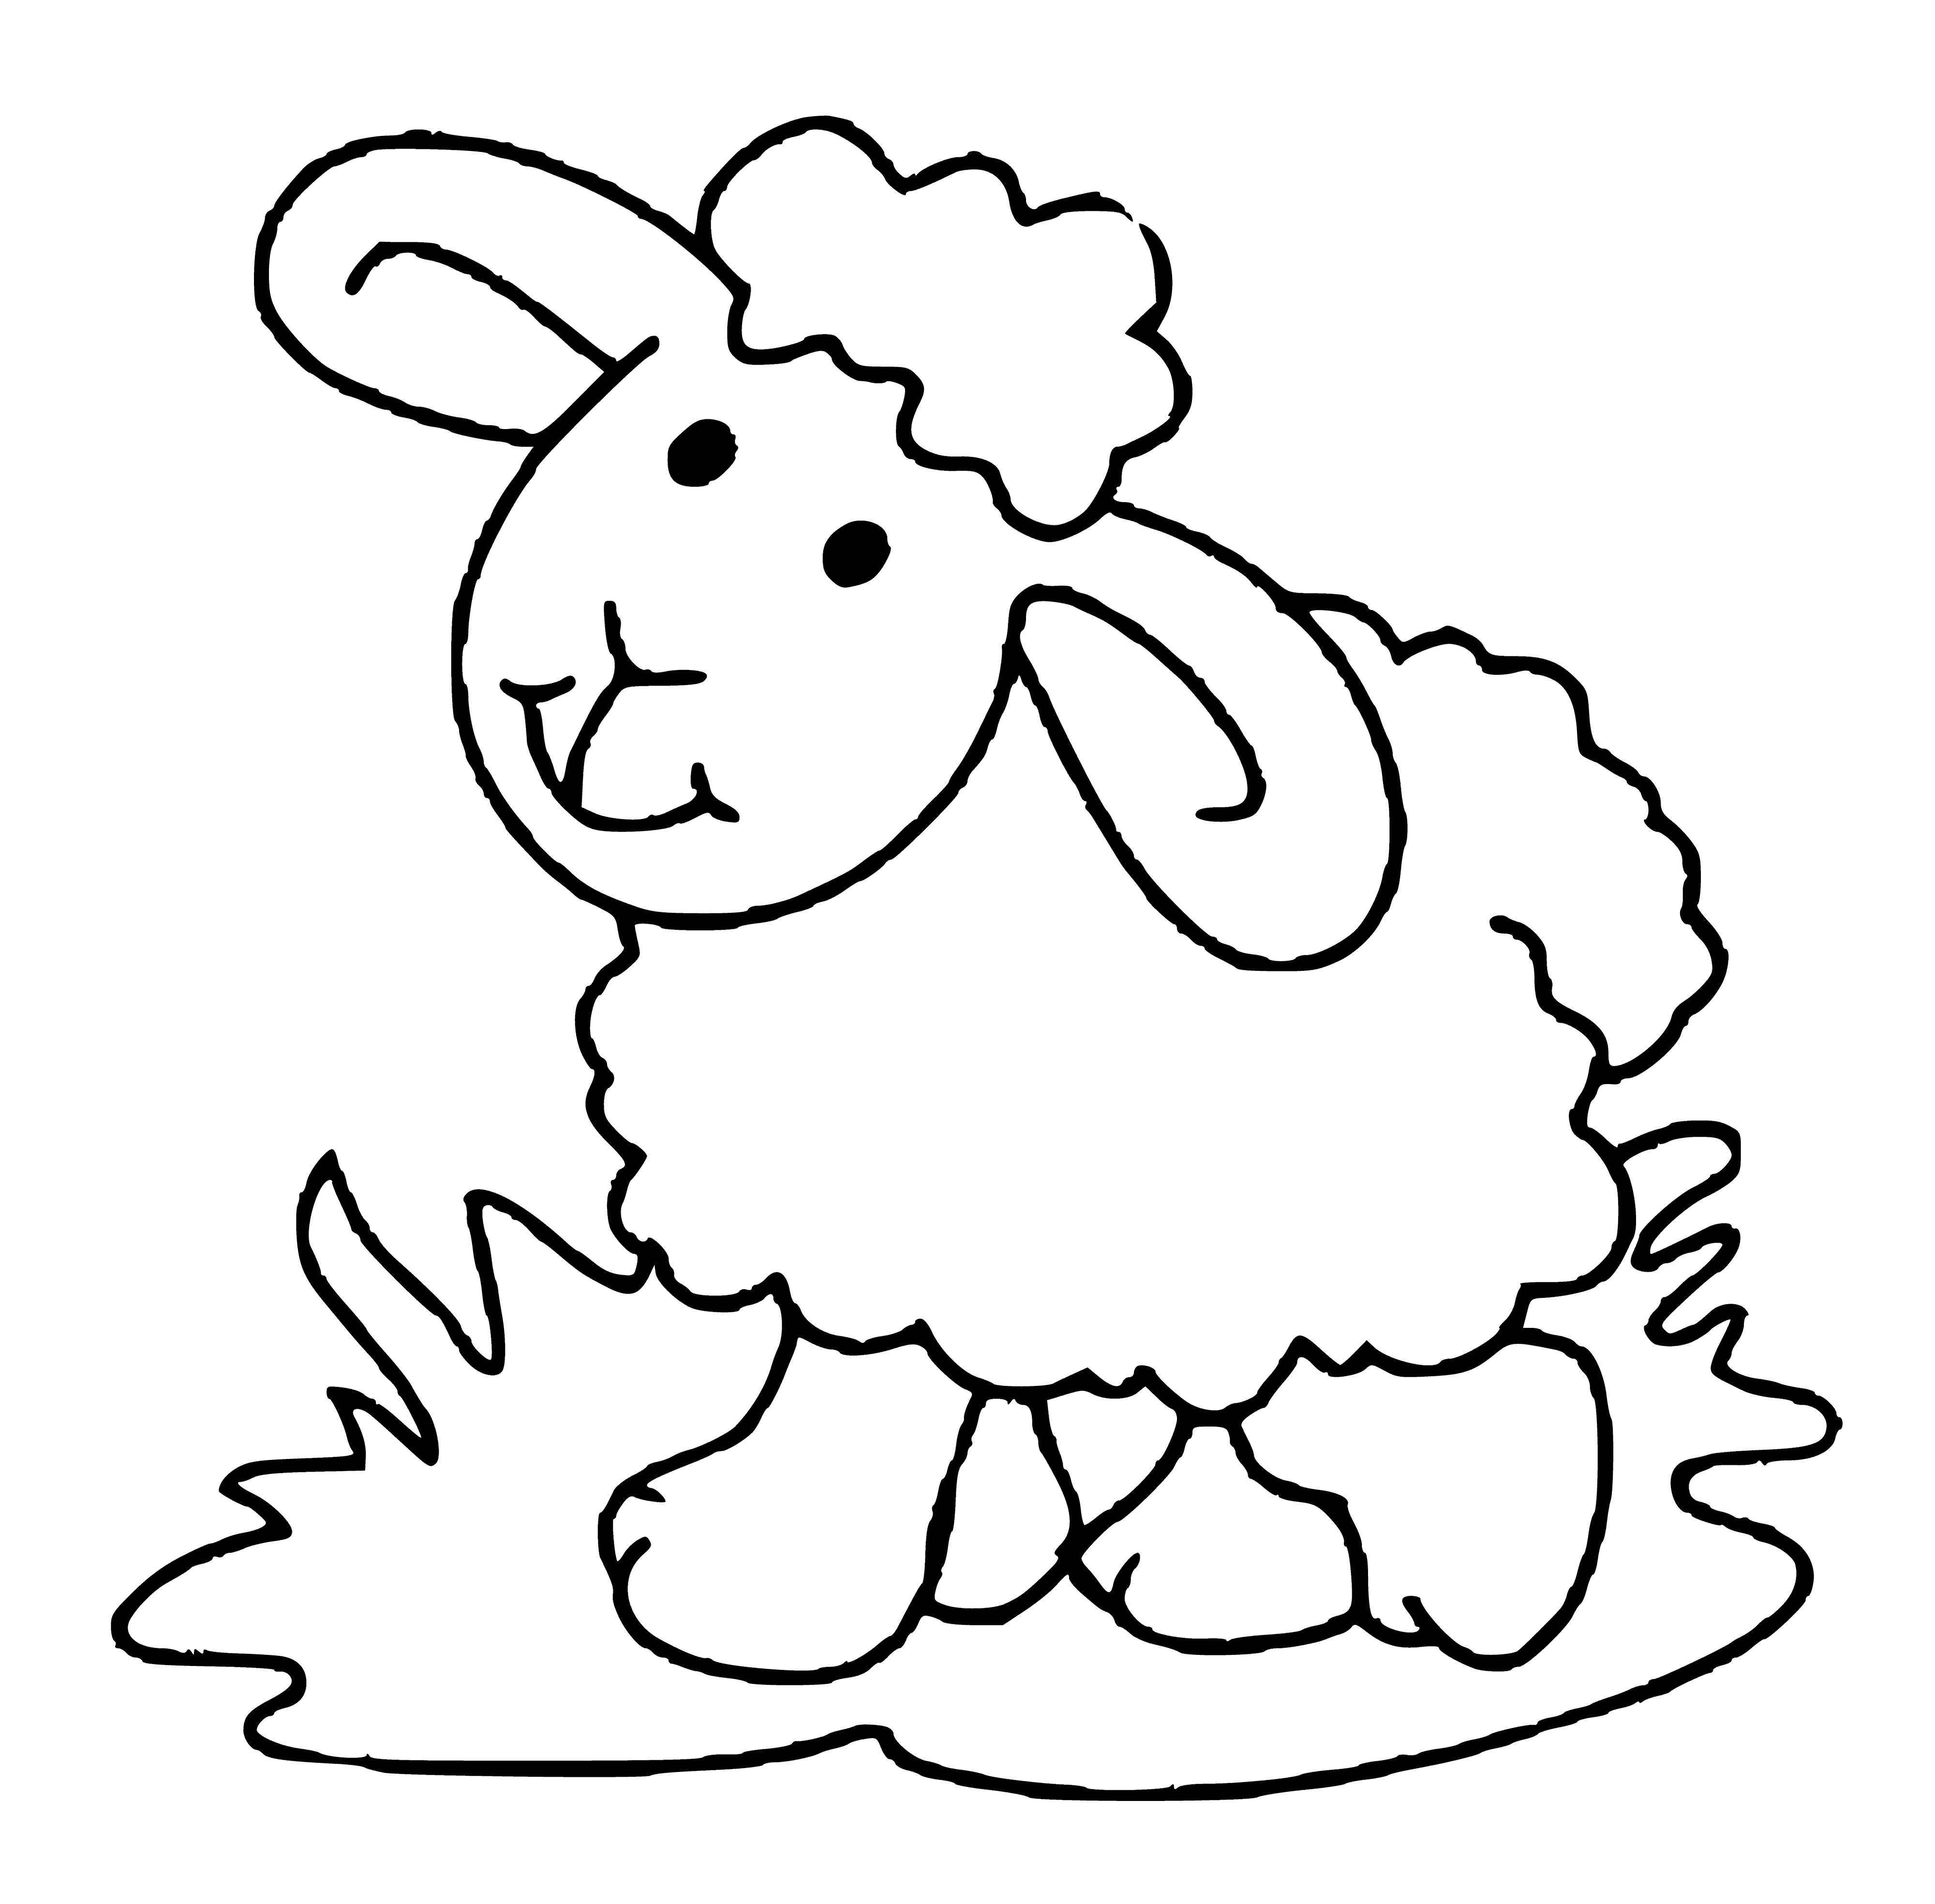 coloring page: Cute lamb stands in a green pasture surrounded by trees, mountains. It's white with black spots, nose, hooves. #coloringpage